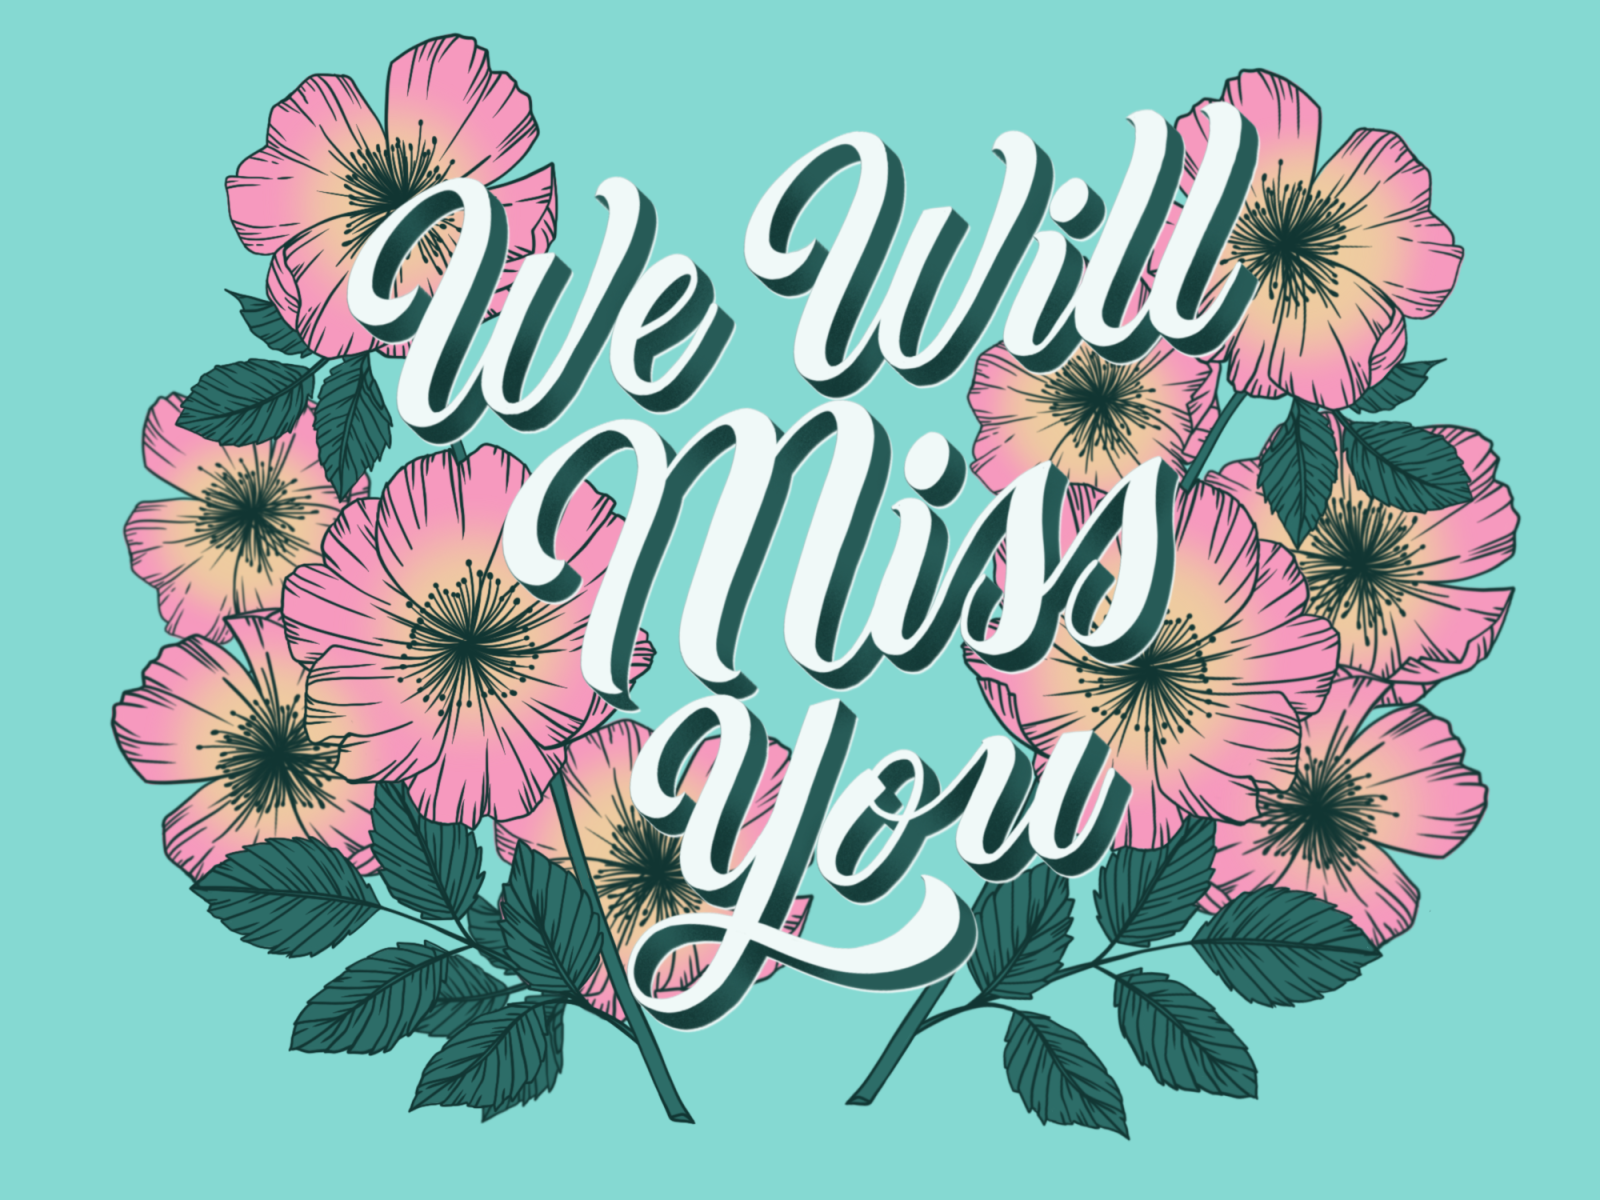 We Will Miss You - Tribute to my Grandpa flower flowerillustration flowers grandpa graphic designer hand drawn type hand lettering illustration illustrator lettering rest in peace script lettering typography